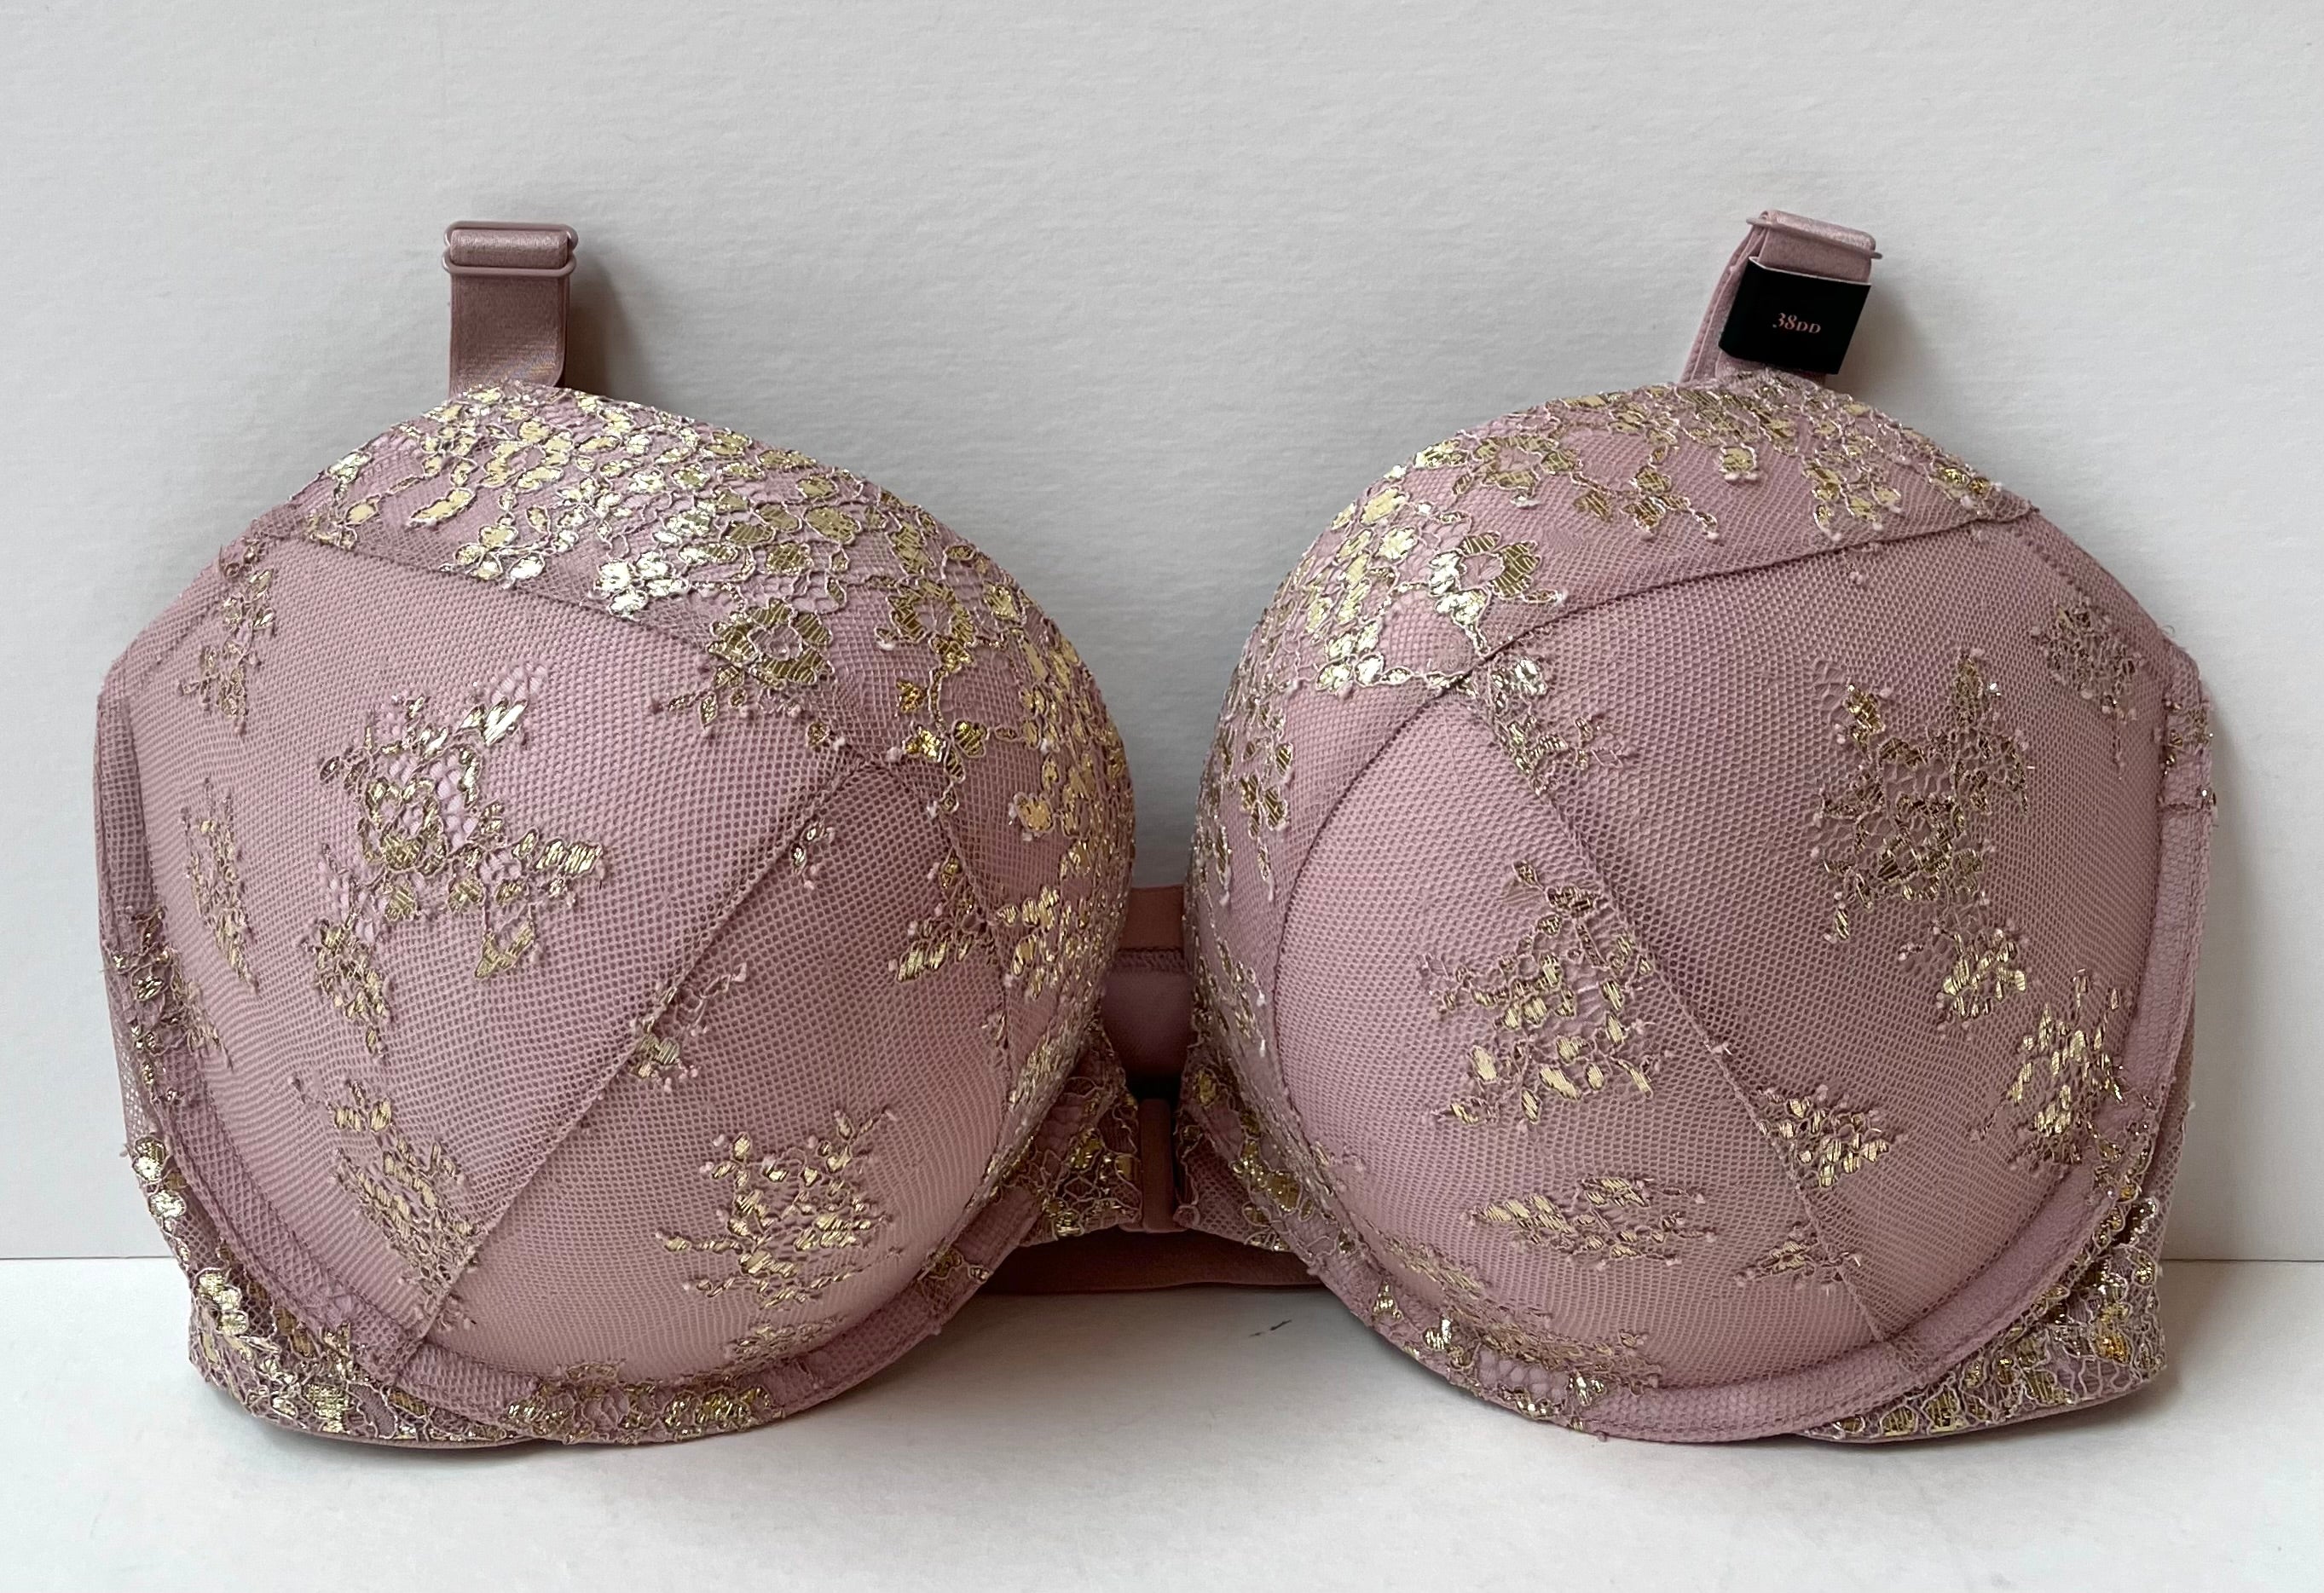 NEW Pre-Owned Victoria’s Secret Very Sexy Blush/Gold Lace Push Up Bra, Size: 38DD